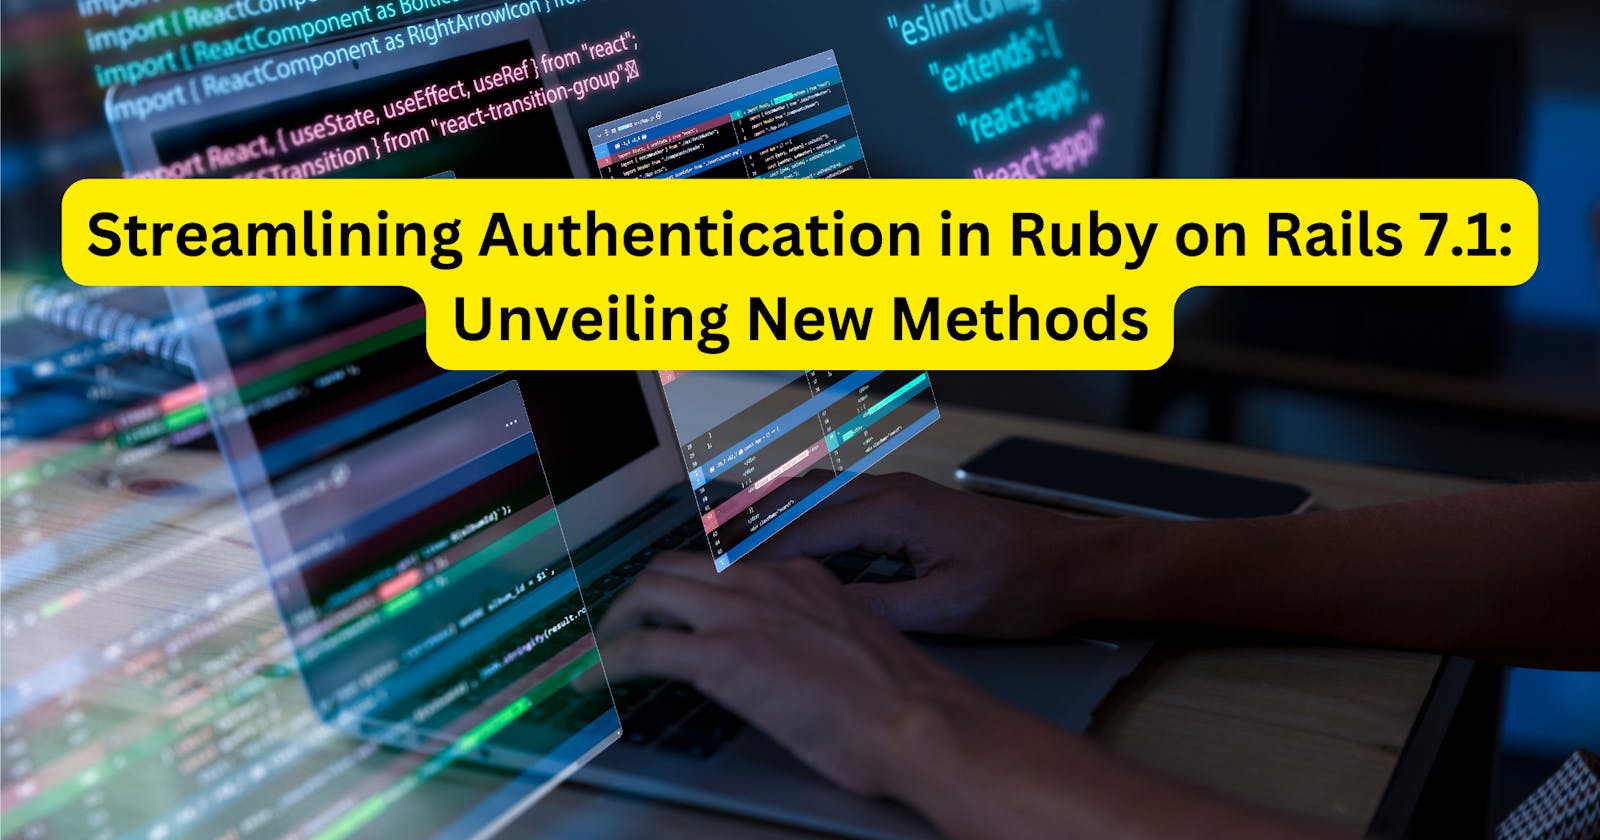 Streamlining Authentication in Ruby on Rails 7.1: Unveiling New Methods